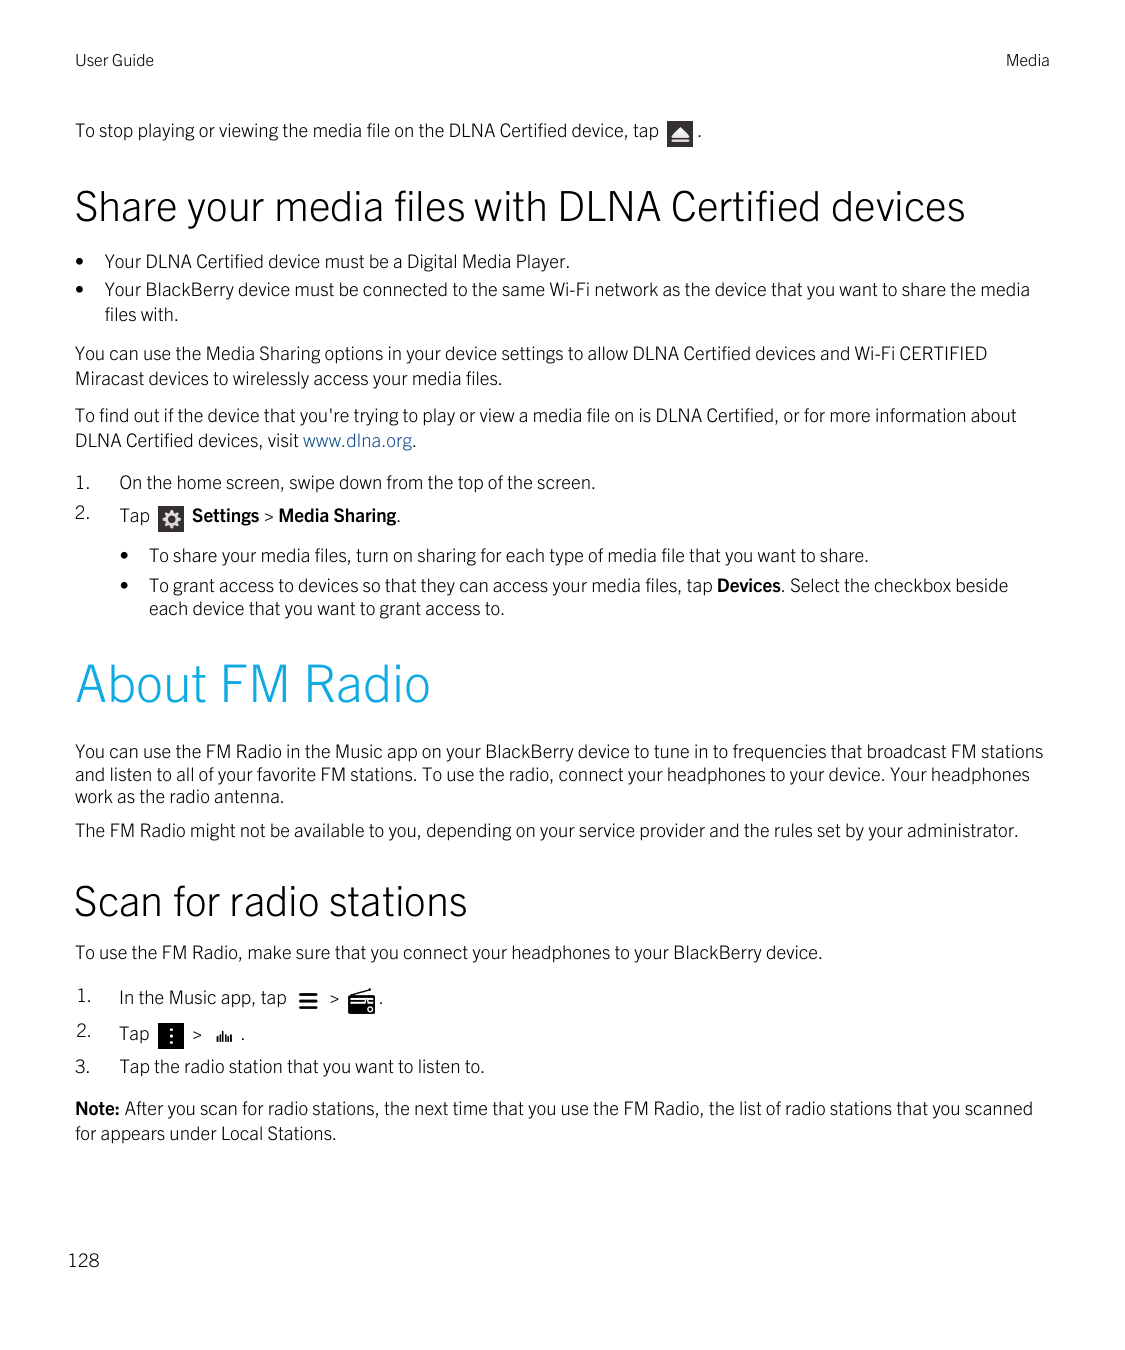 User GuideMediaTo stop playing or viewing the media file on the DLNA Certified device, tap.Share your media files with DLNA Cert